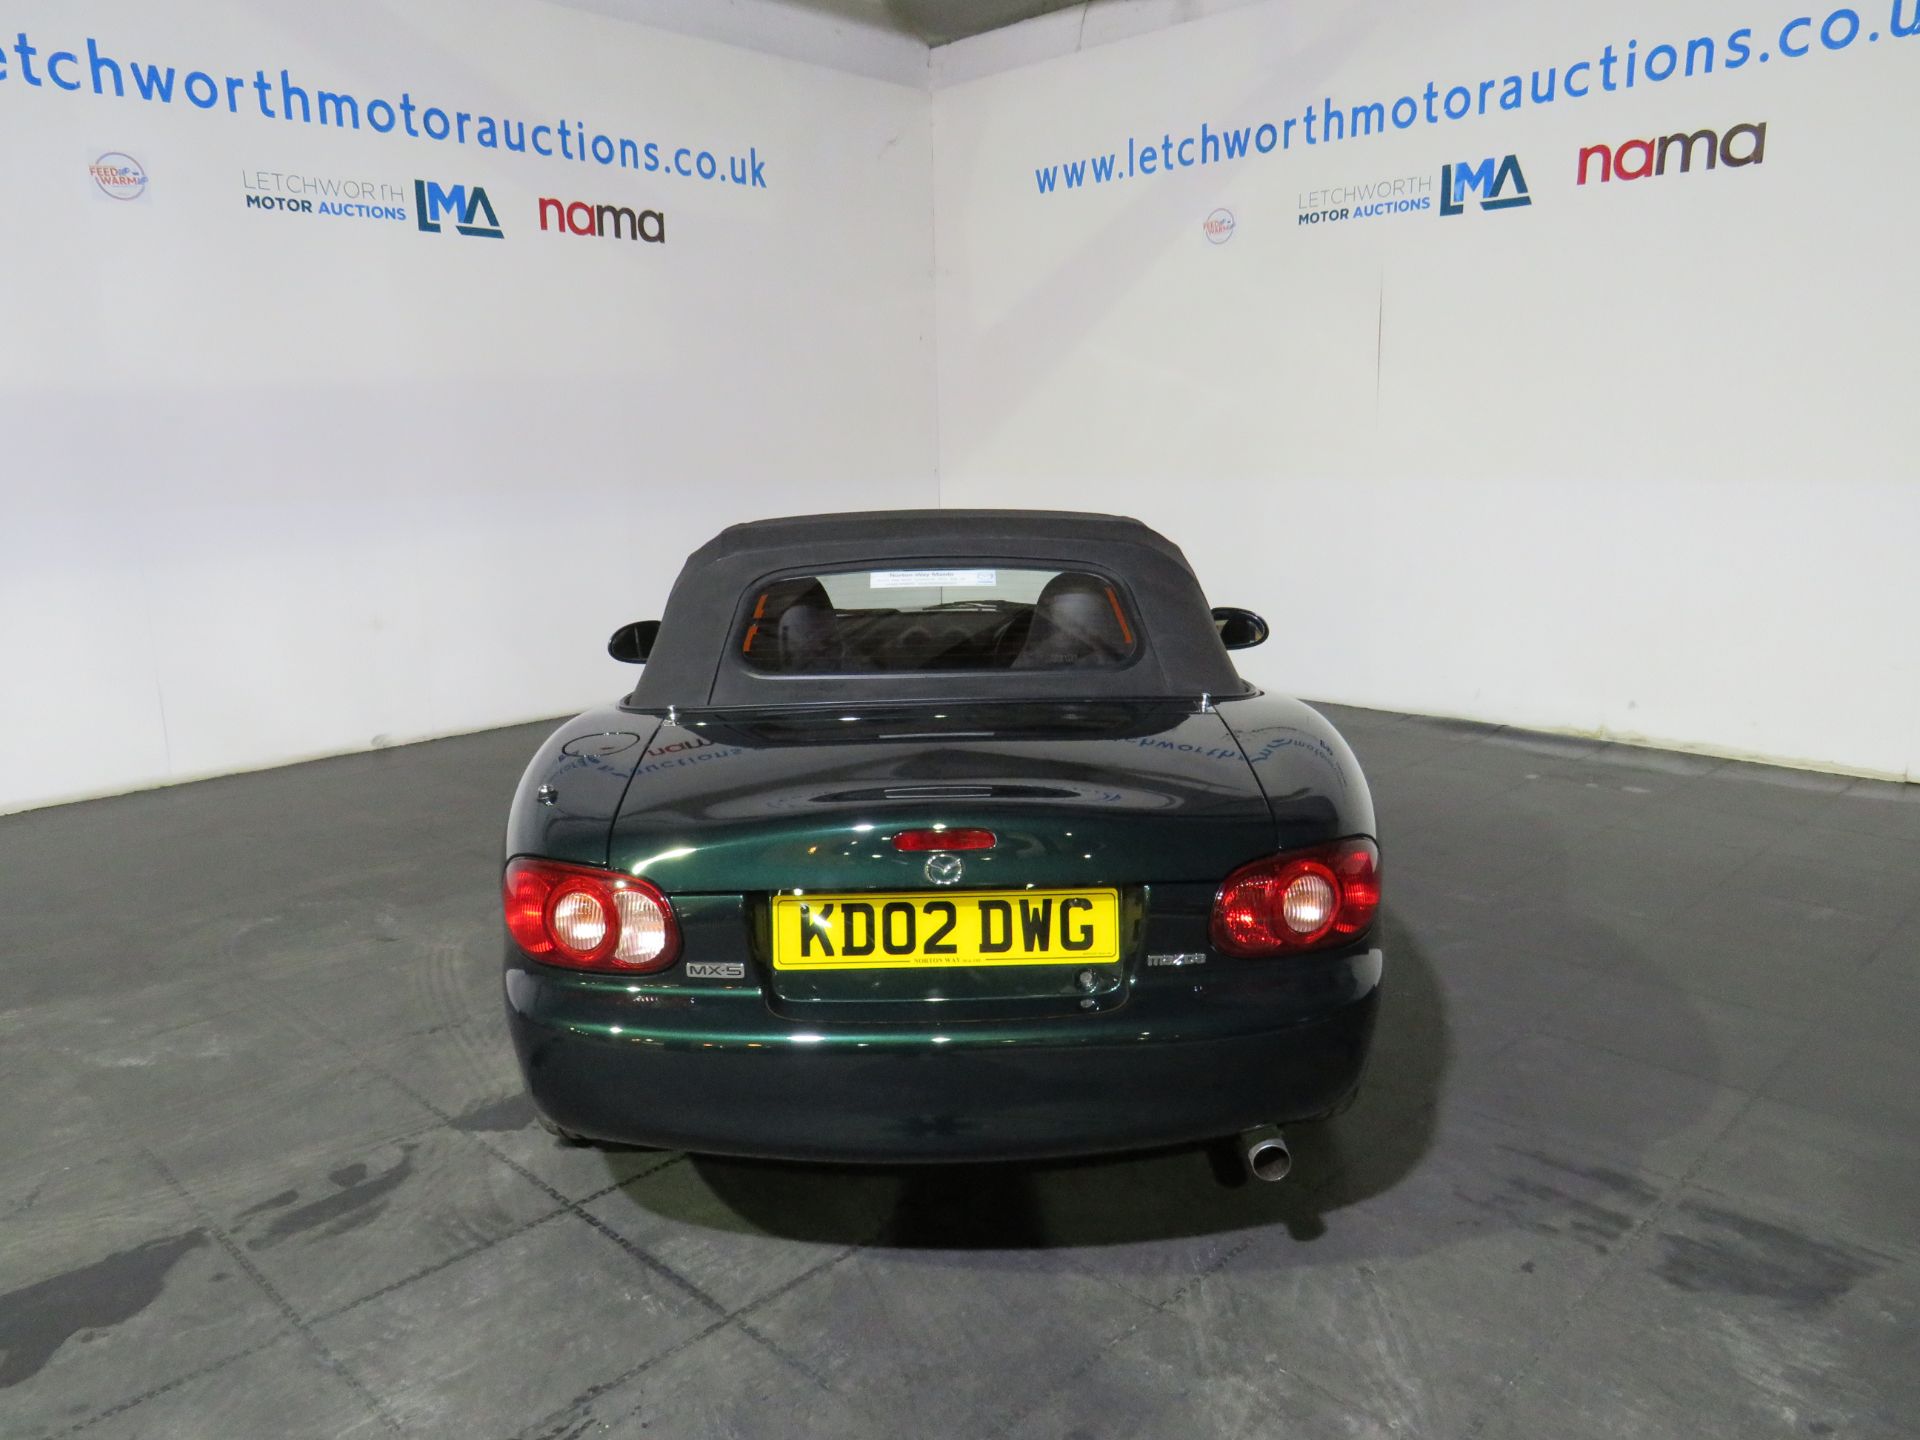 2002 Mazda MX-5 - 1598cc - 1,900 MILES FROM NEW - Image 10 of 39